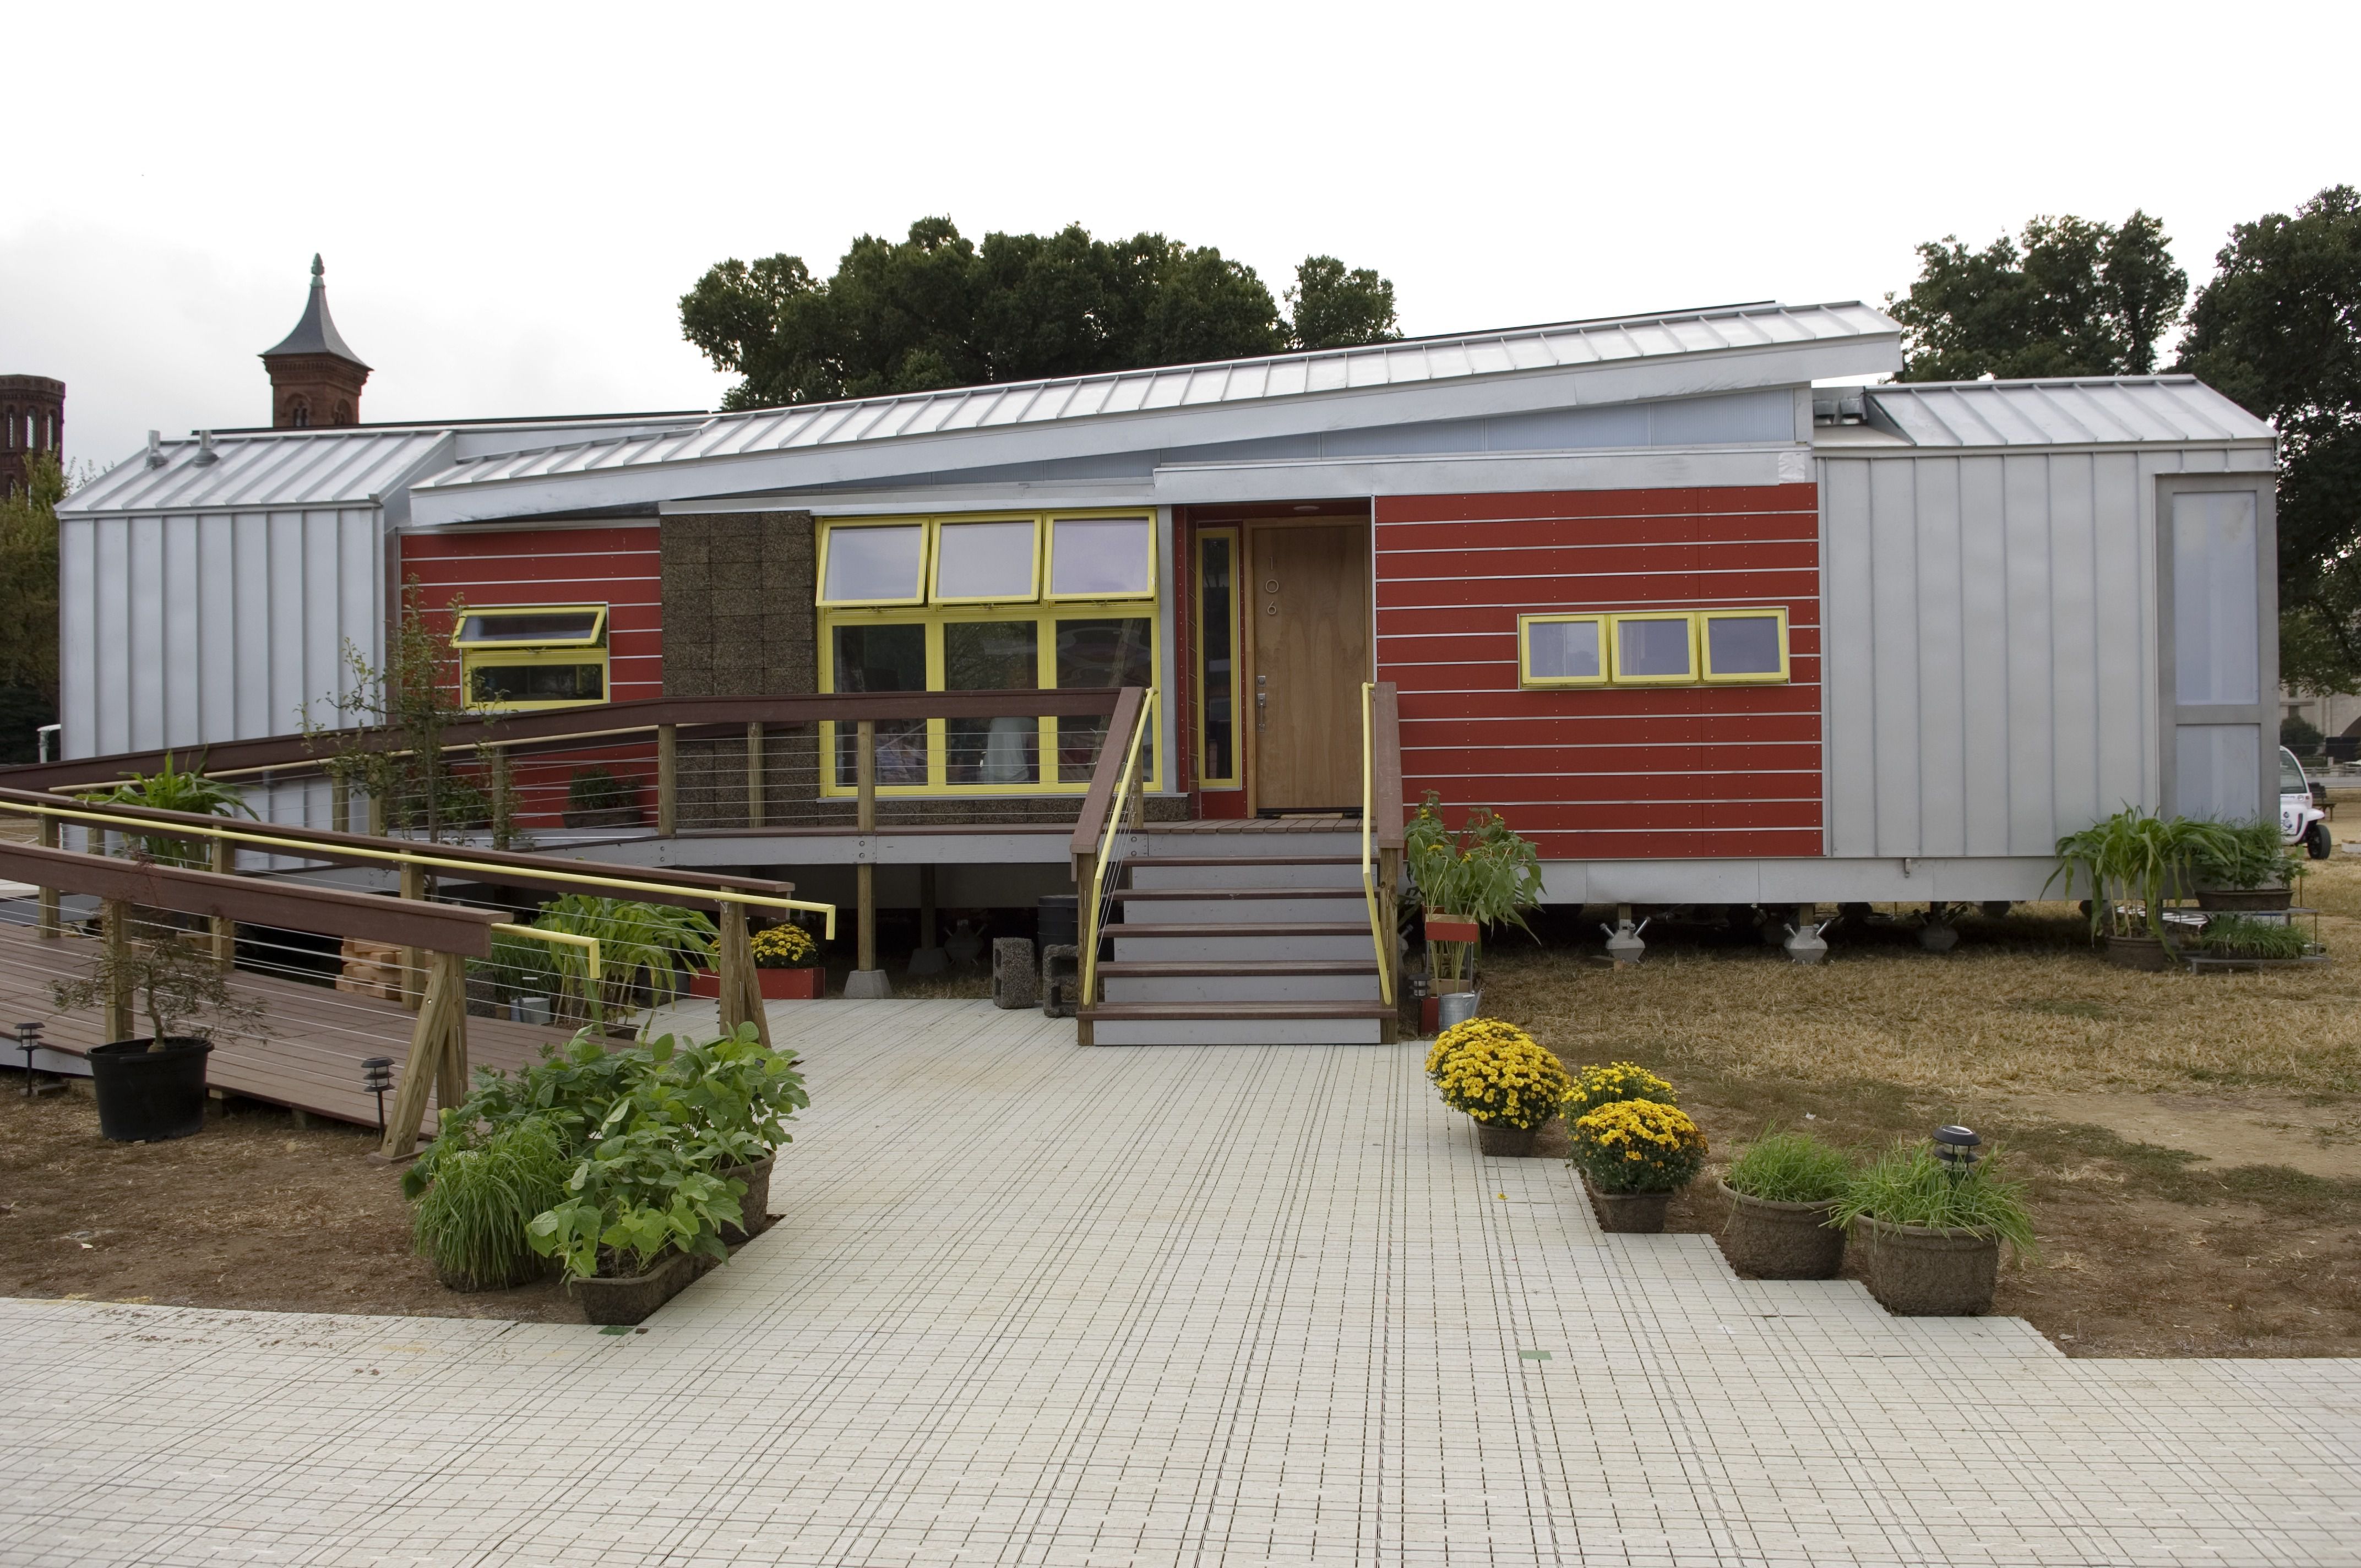 What Is the US Solar Decathlon